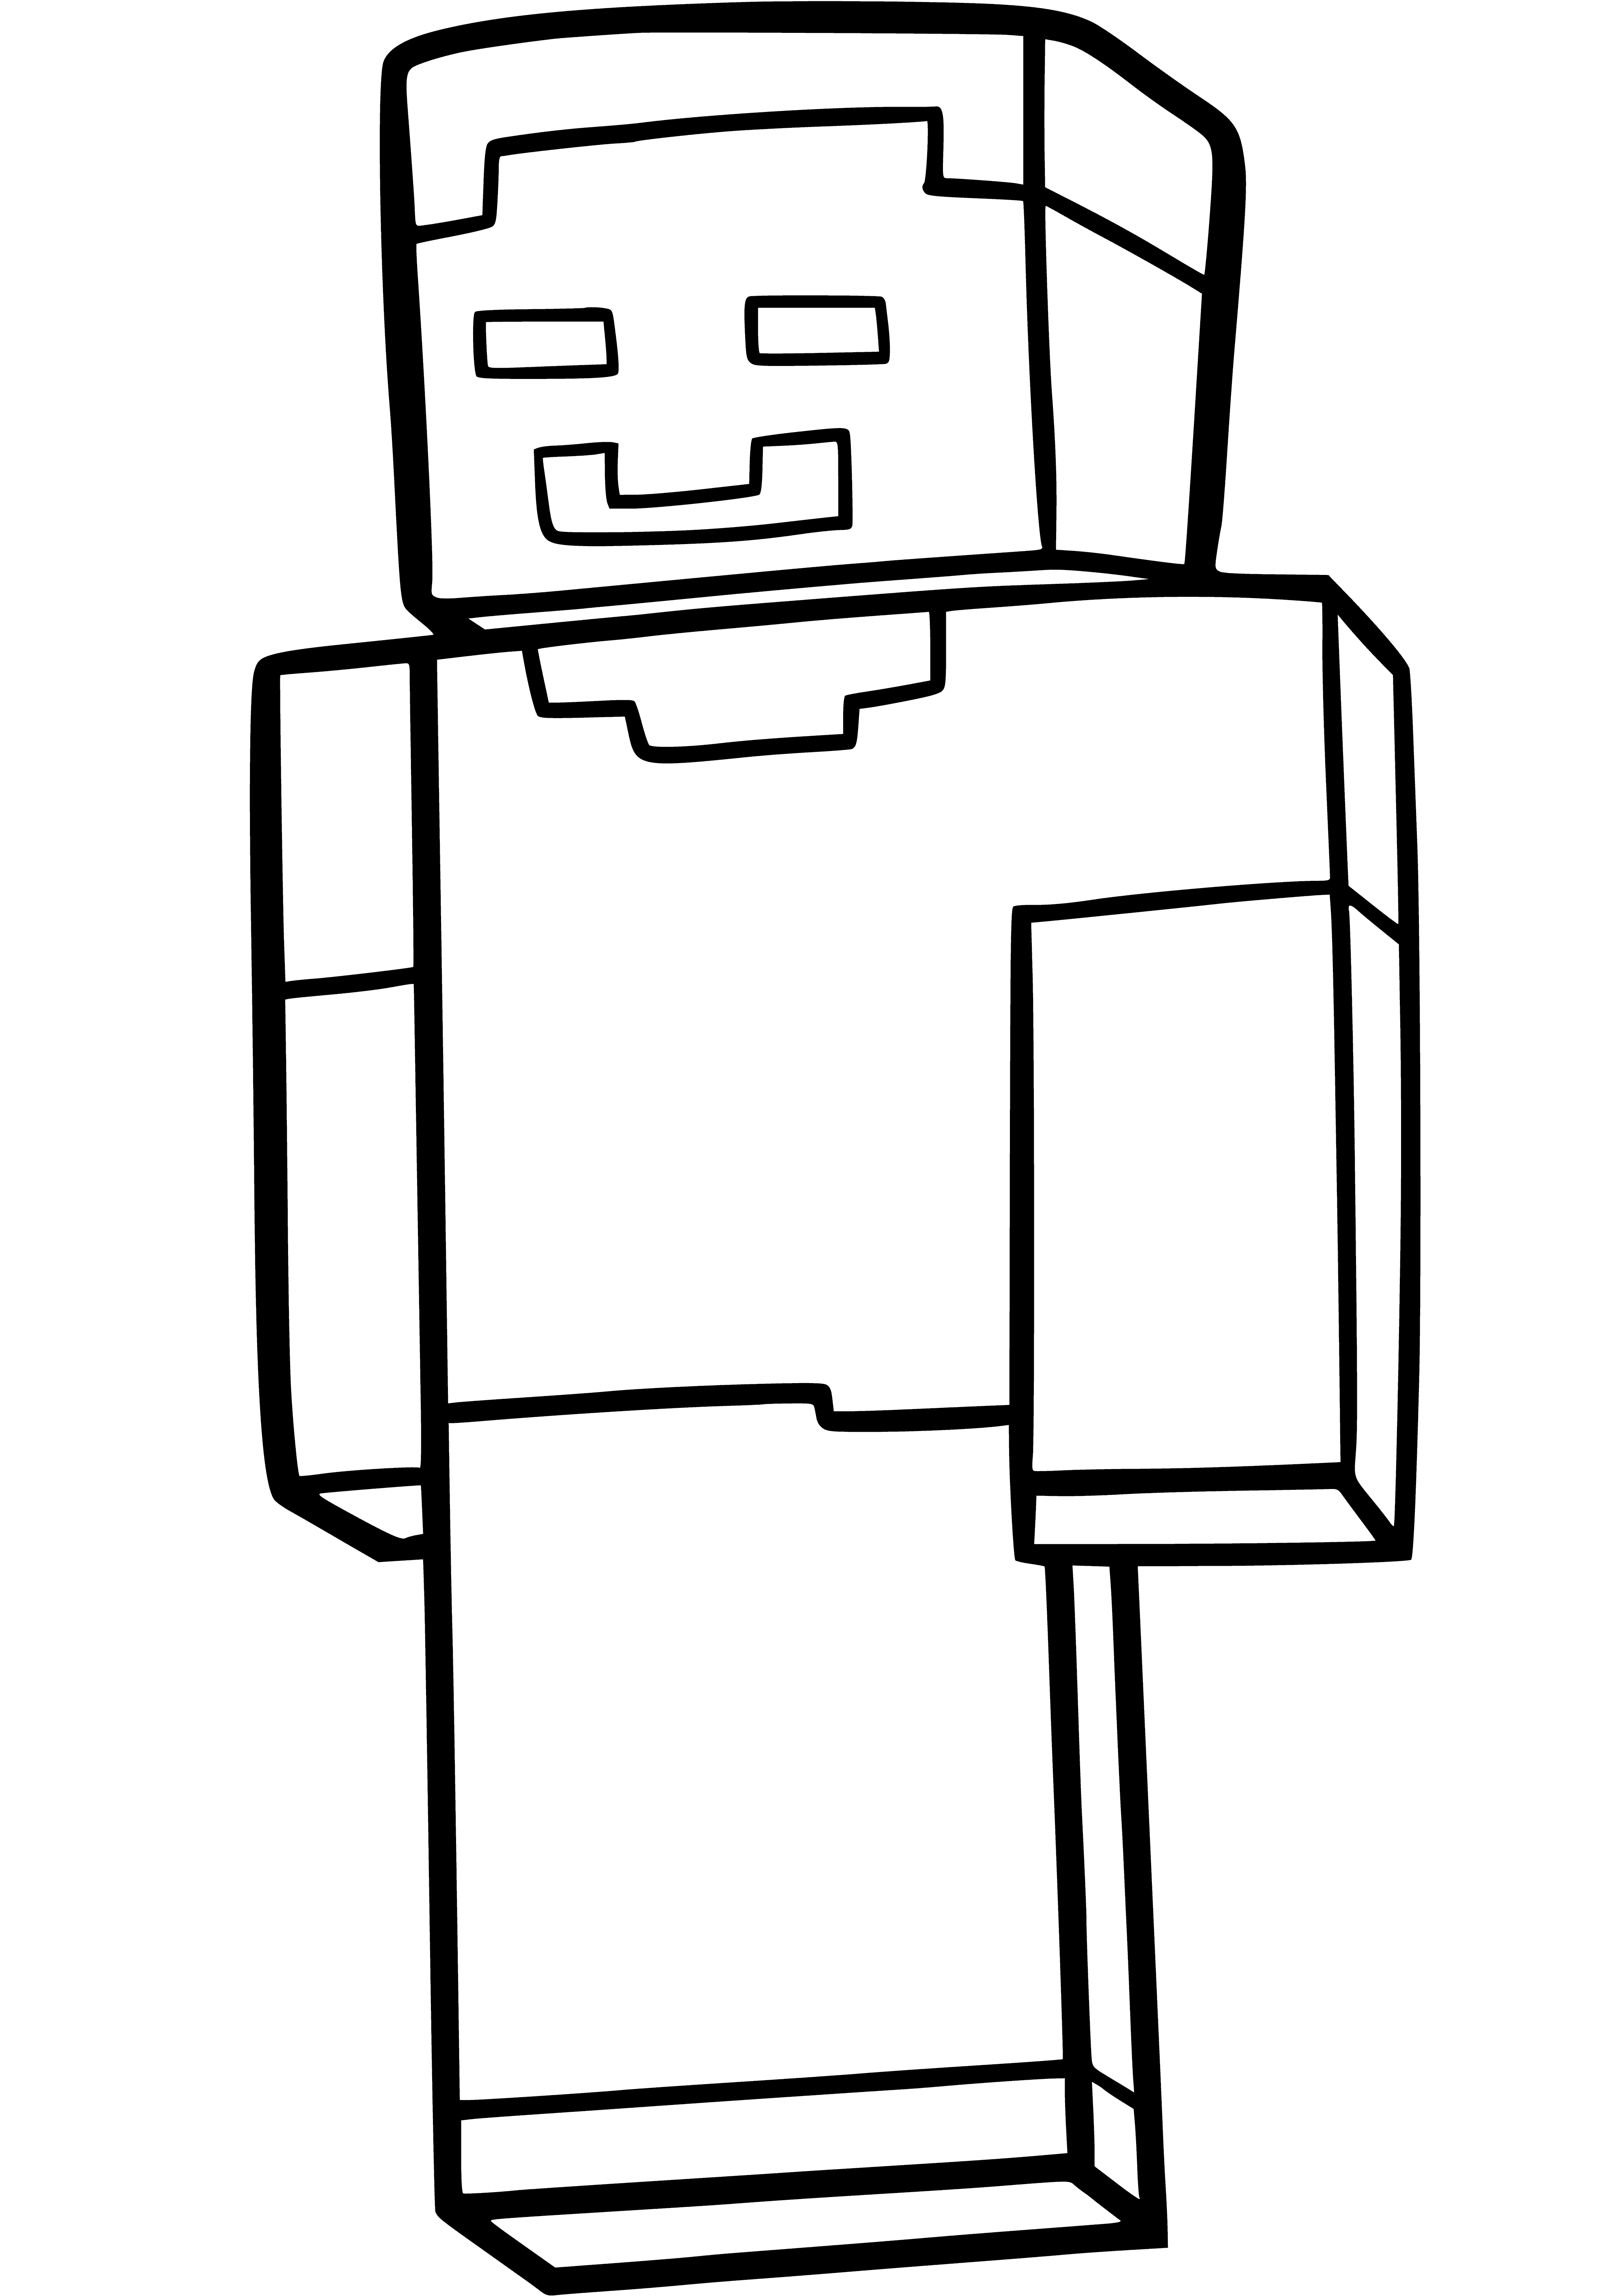 coloring page: Minecraft character Herobrin has green eyes, light brown hair, white shirt, brown vest, blue jeans, brown belt with sword, and a bow and arrow.